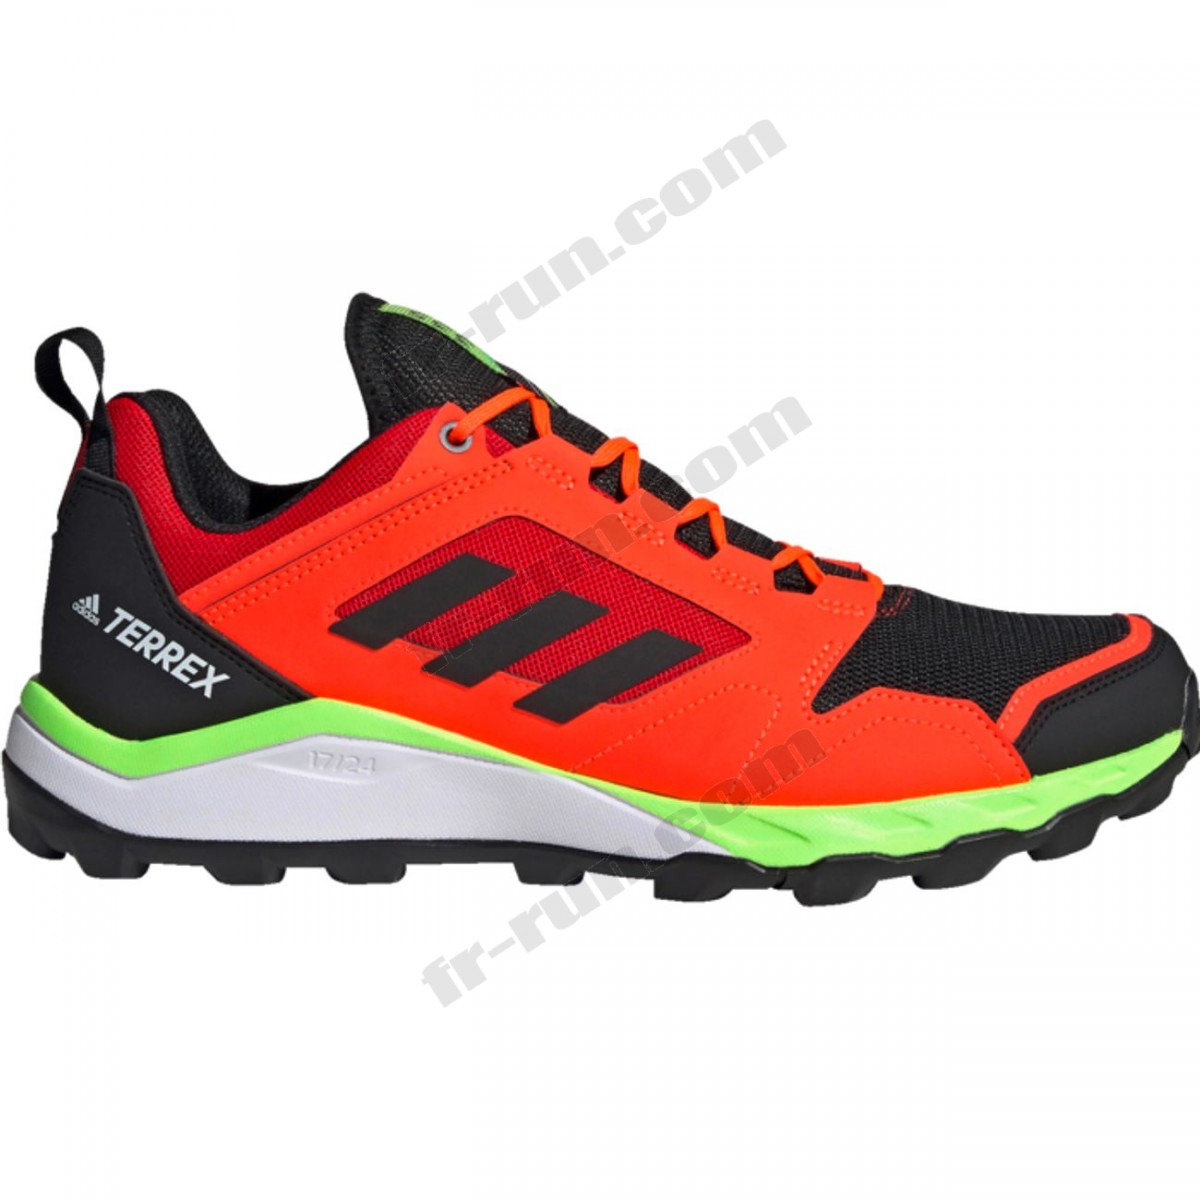 Adidas/CHAUSSURES BASSES running homme ADIDAS TERREX AGRAVIC TR ◇◇◇ Pas Cher Du Tout - -0